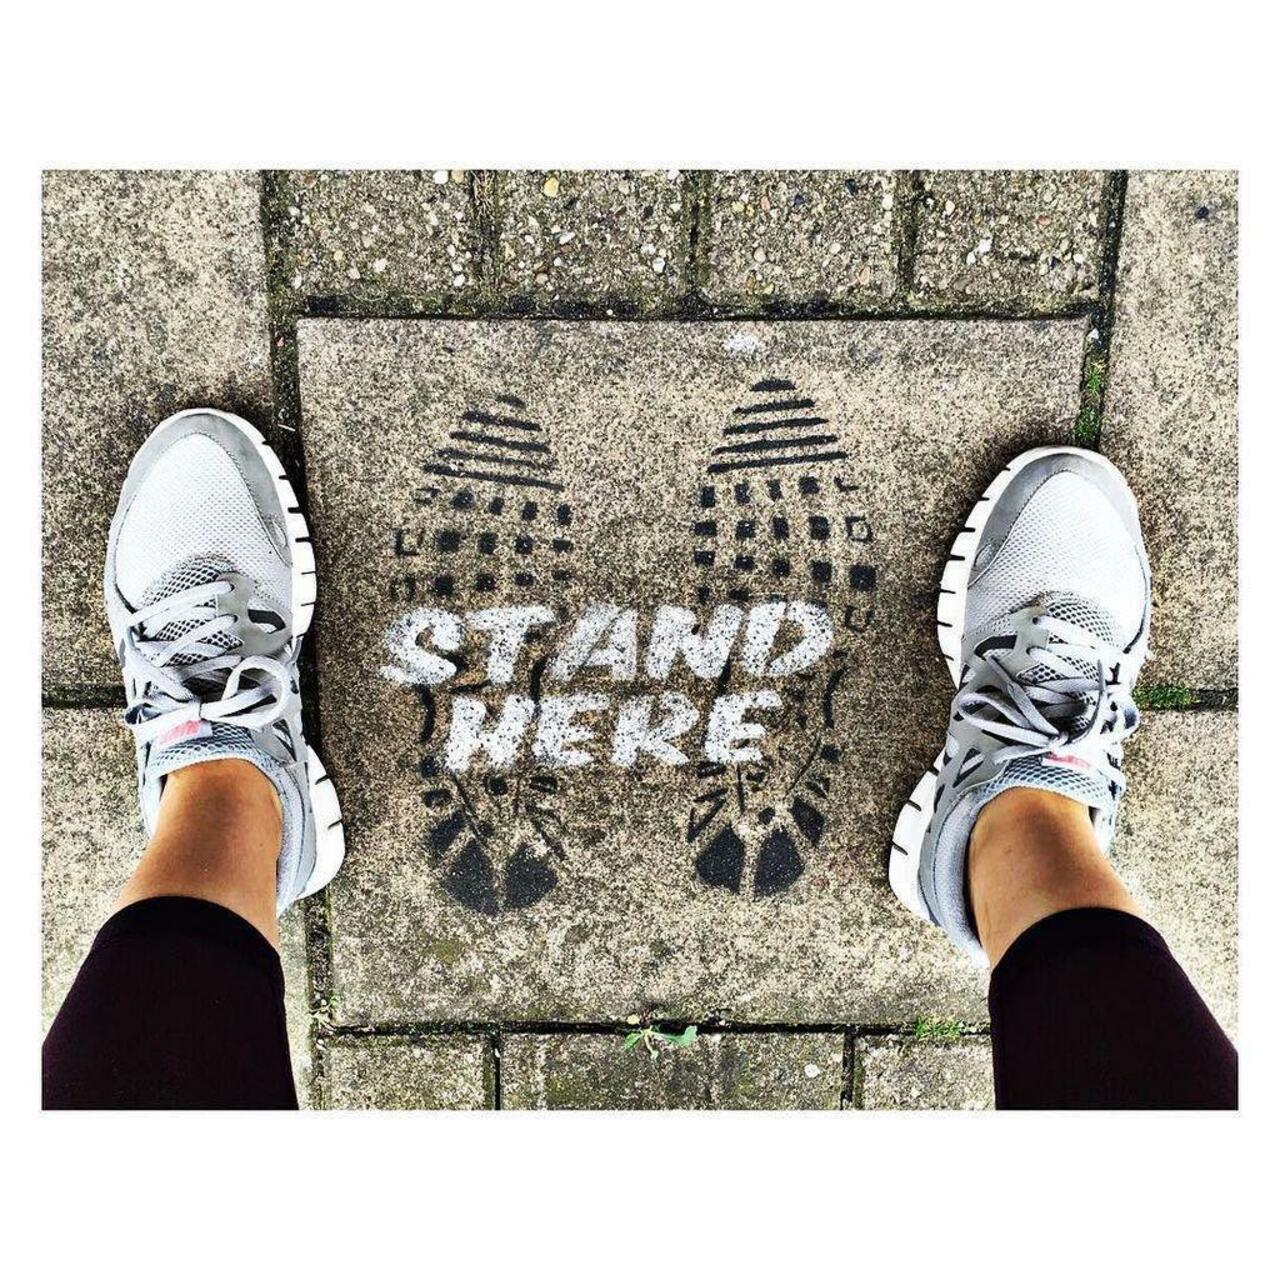 Stood on the side...what a rebel  @dotmasters #dotmasters #streetart #graffiti #paint #spraypaint #footstep #nike … http://t.co/QXwuaUQCQc